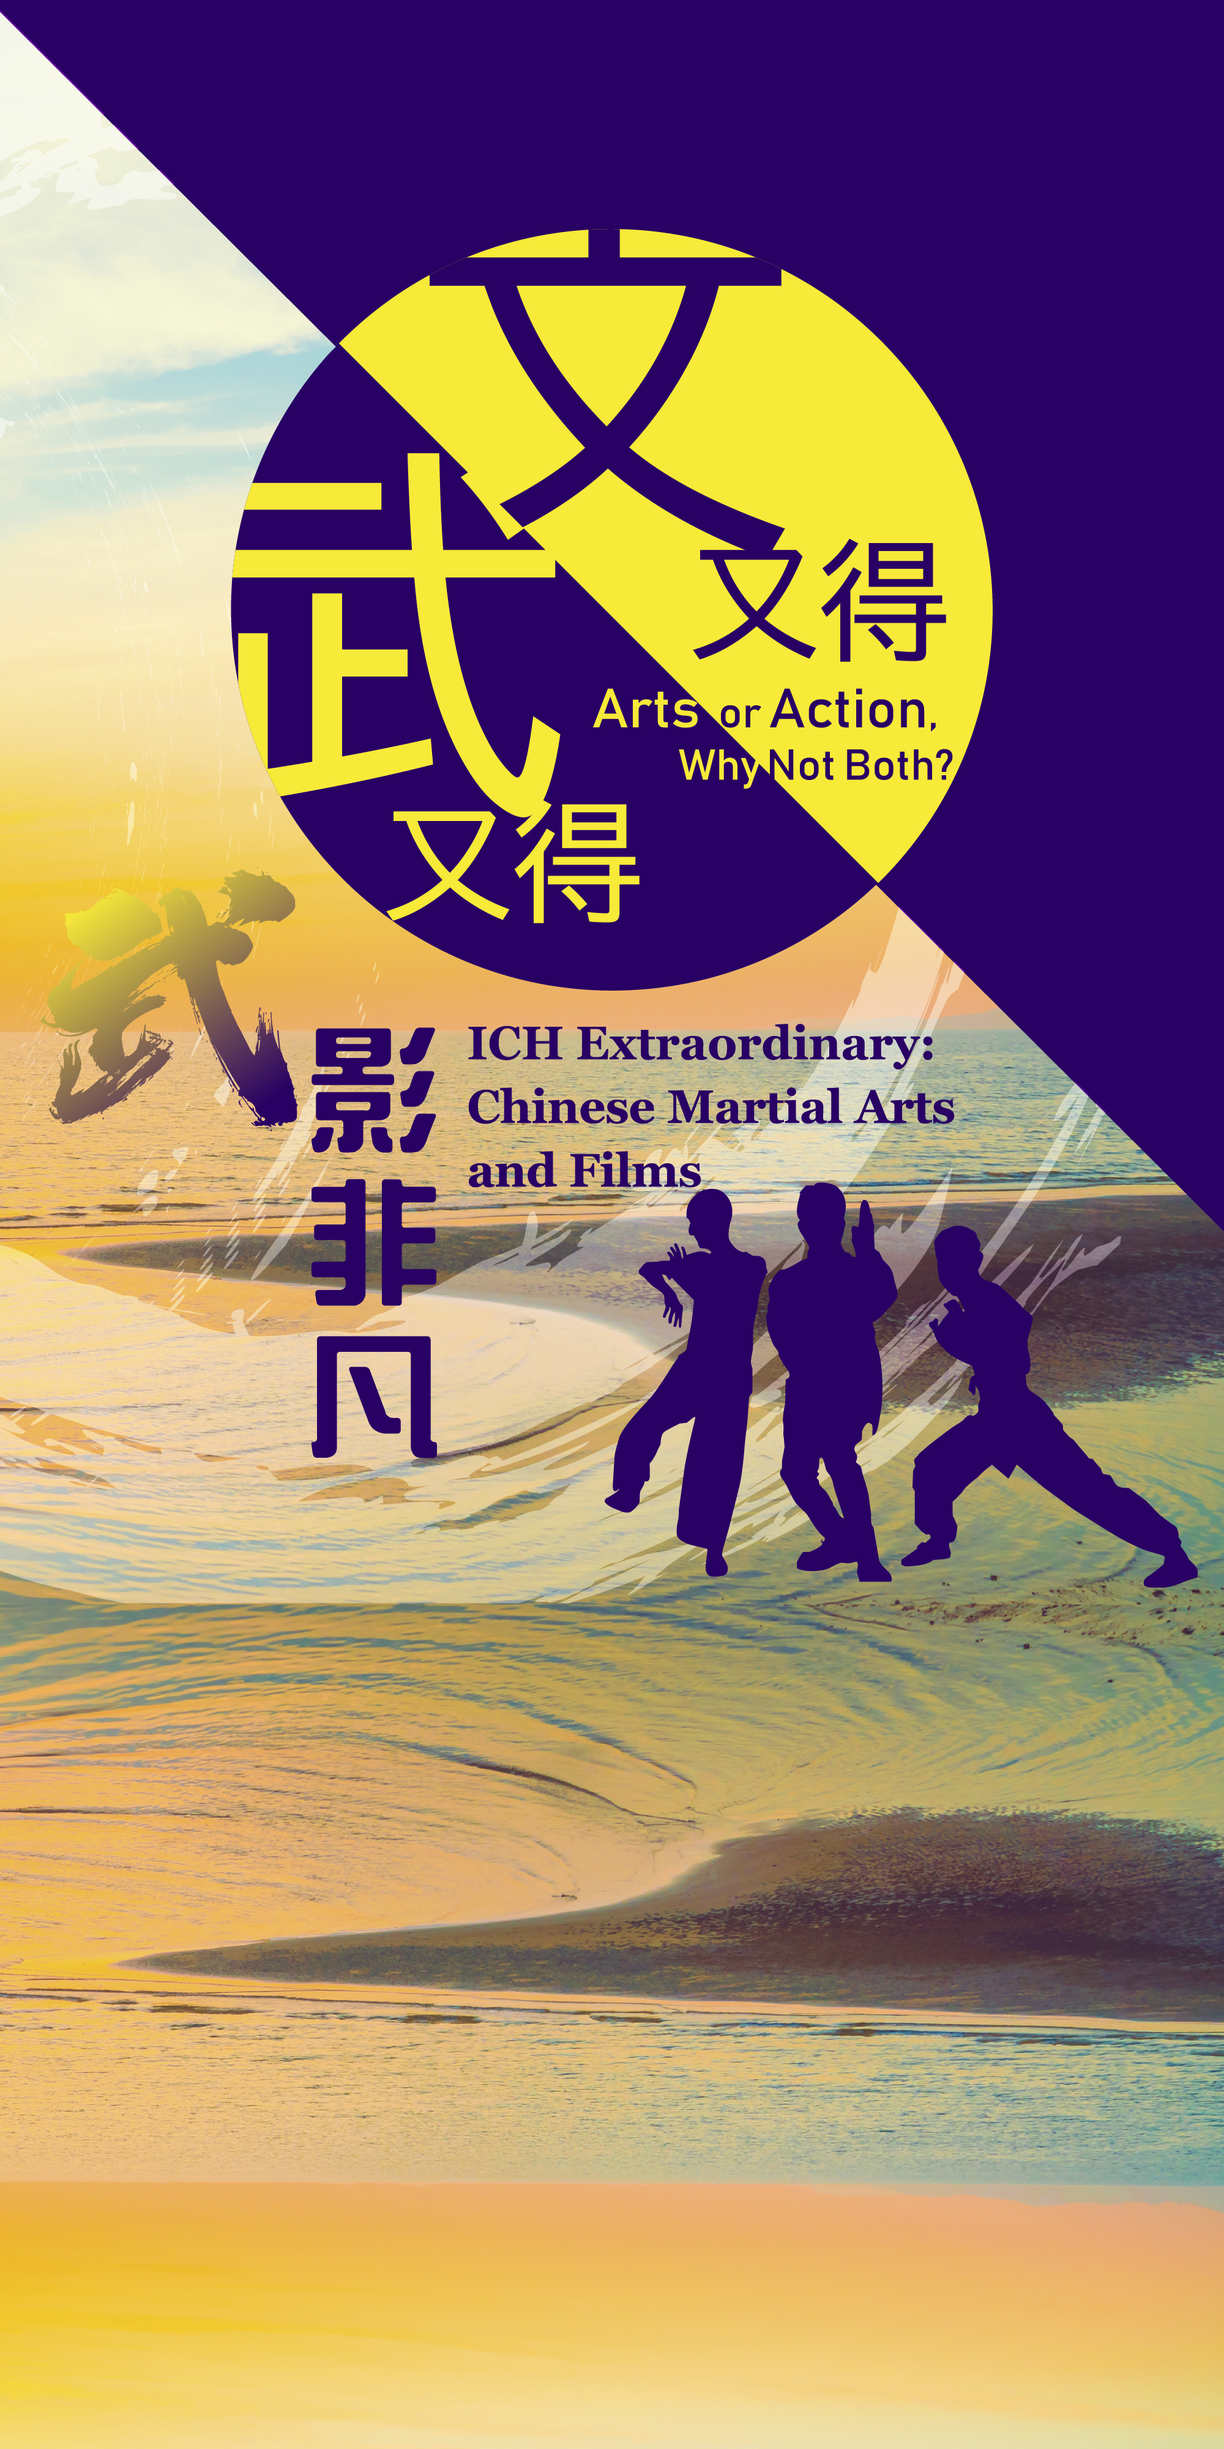 Arts or Action, Why Not Both? ICH Extraordinary: Chinese Martial Arts and Films - mobile